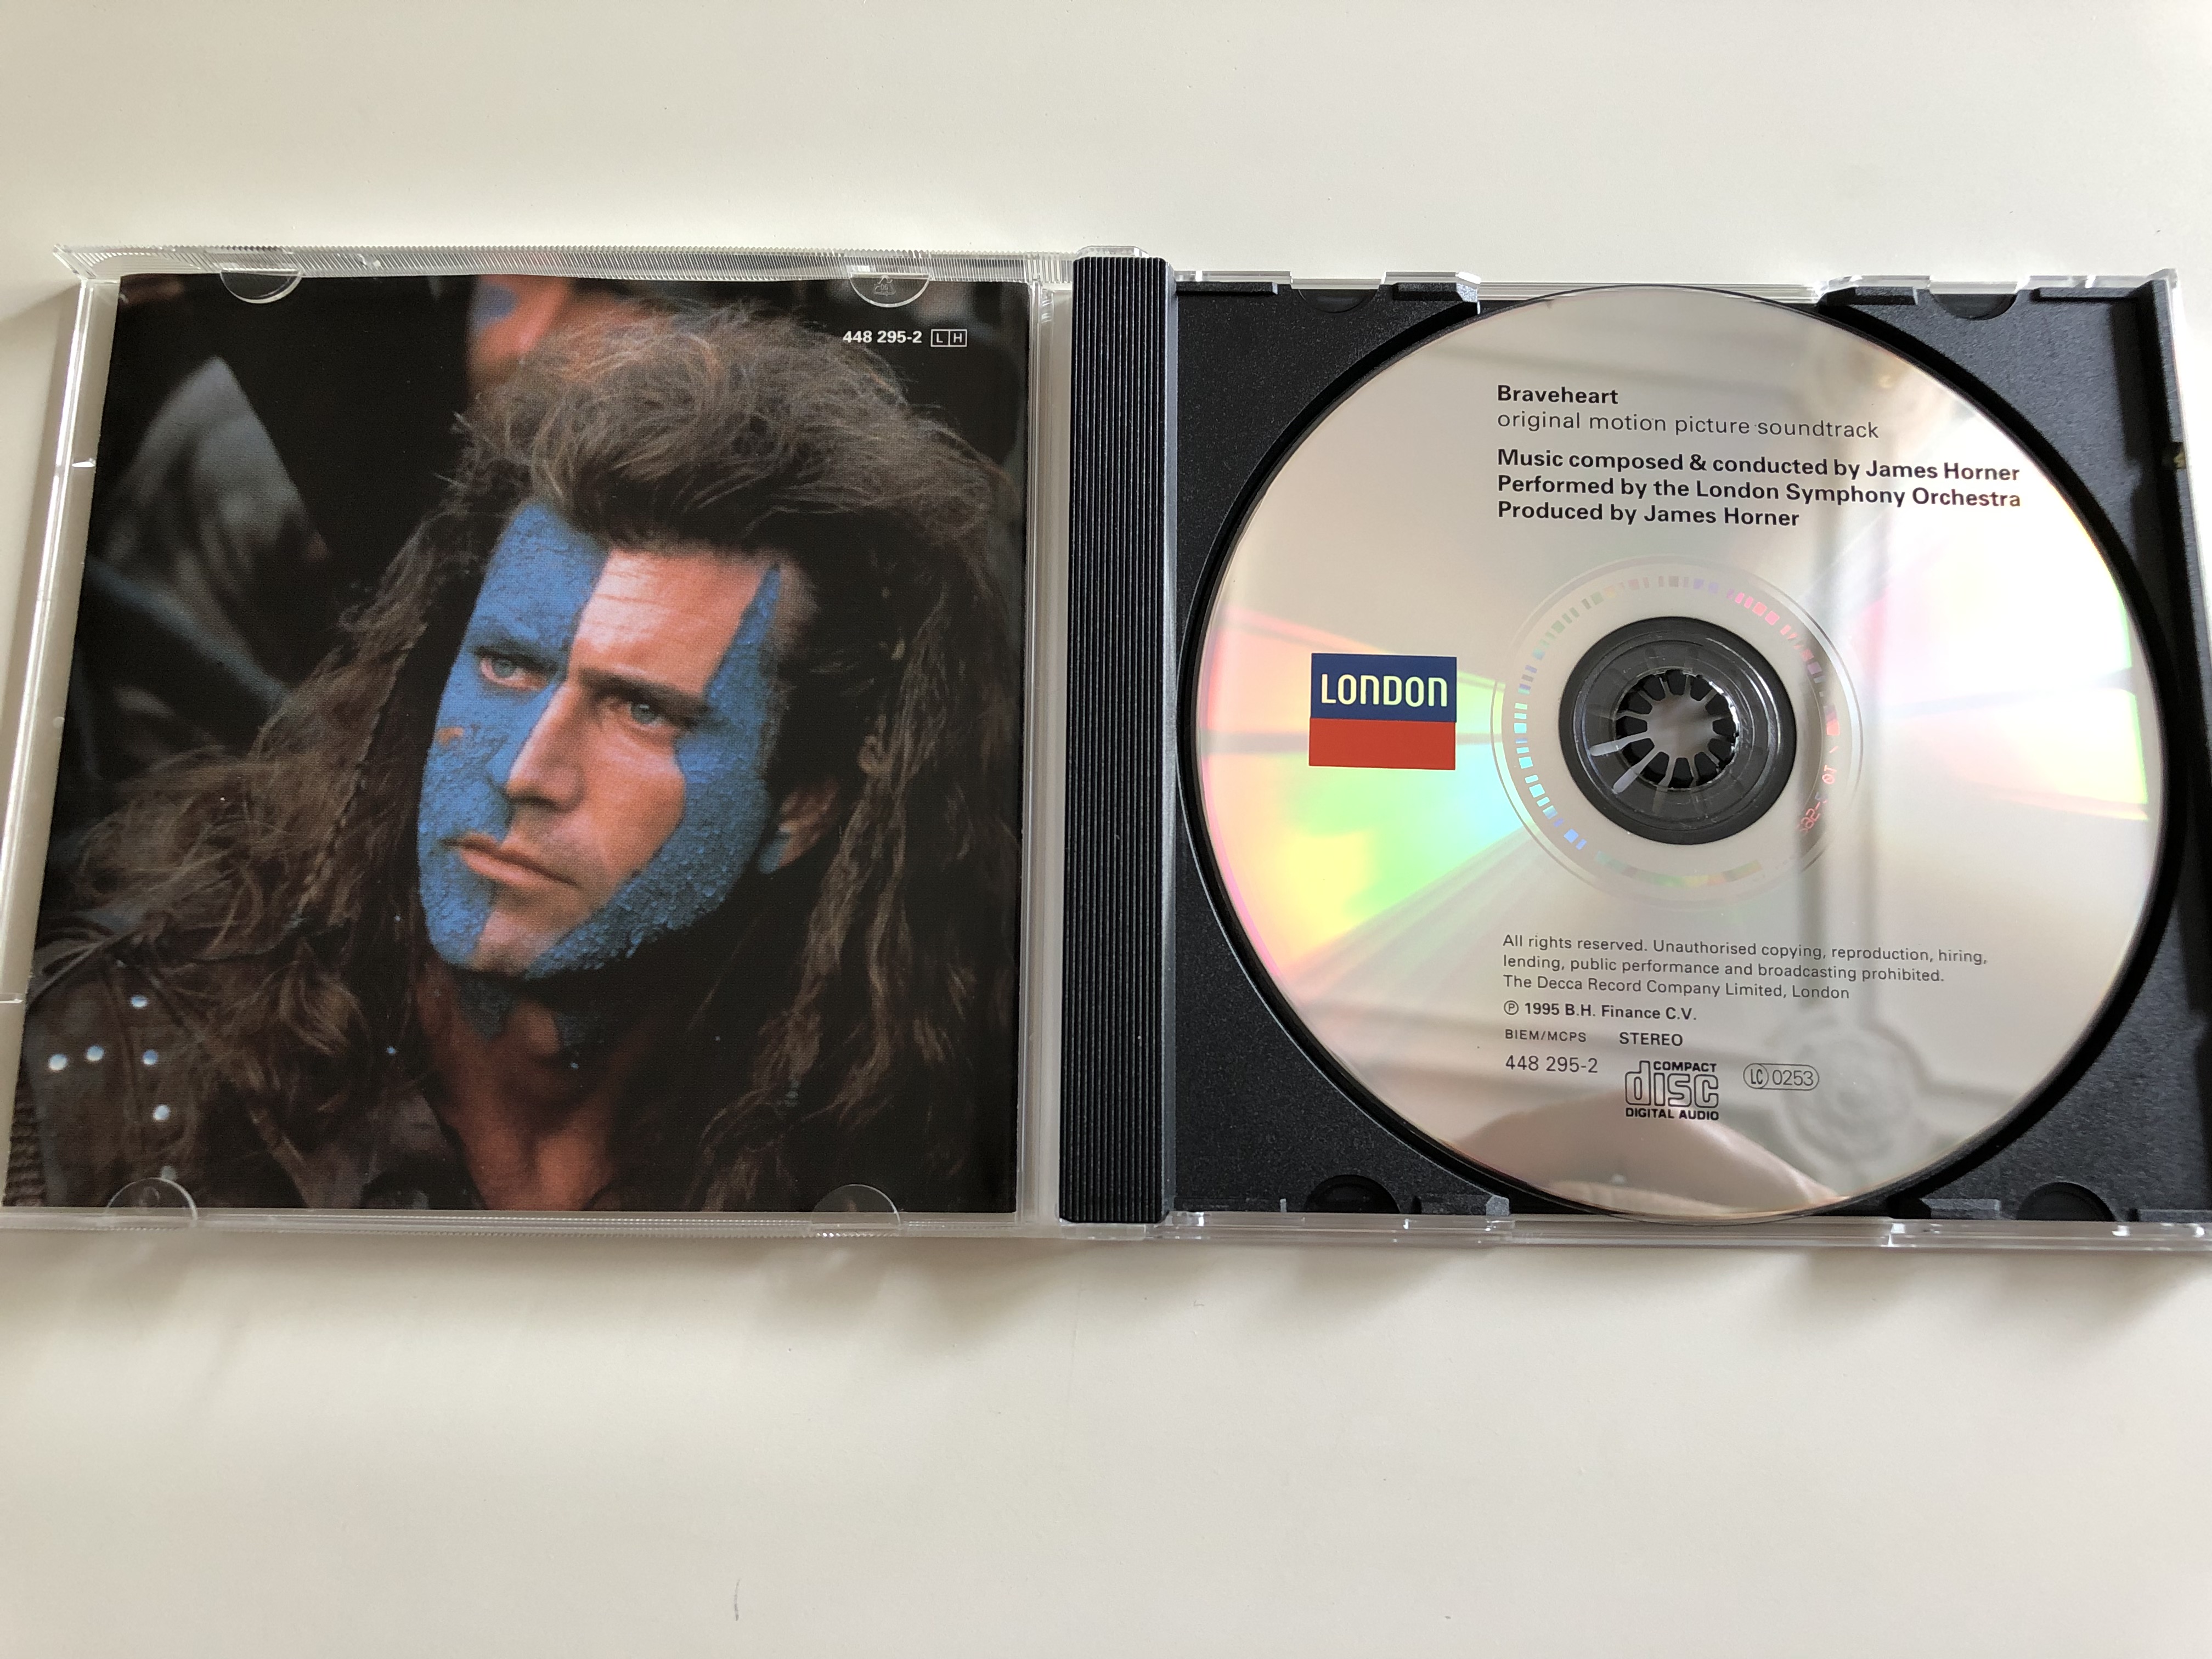 braveheart-original-motion-picture-soundtrack-music-composed-and-conducted-by-james-horner-london-symphony-orchestra-audio-cd-1995-4-.jpg